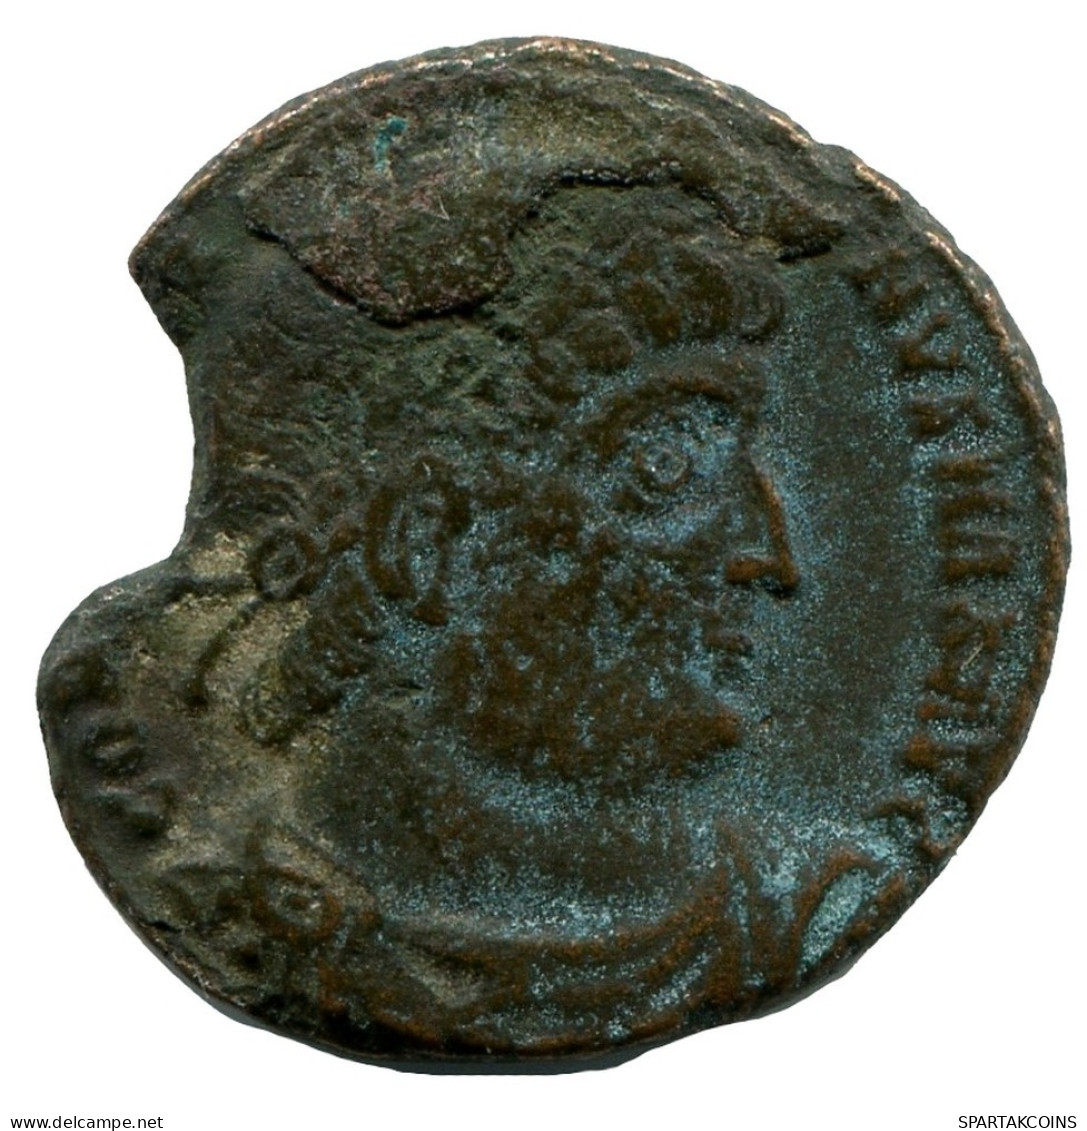 CONSTANTINE I MINTED IN ANTIOCH FOUND IN IHNASYAH HOARD EGYPT #ANC10712.14.D.A - El Impero Christiano (307 / 363)